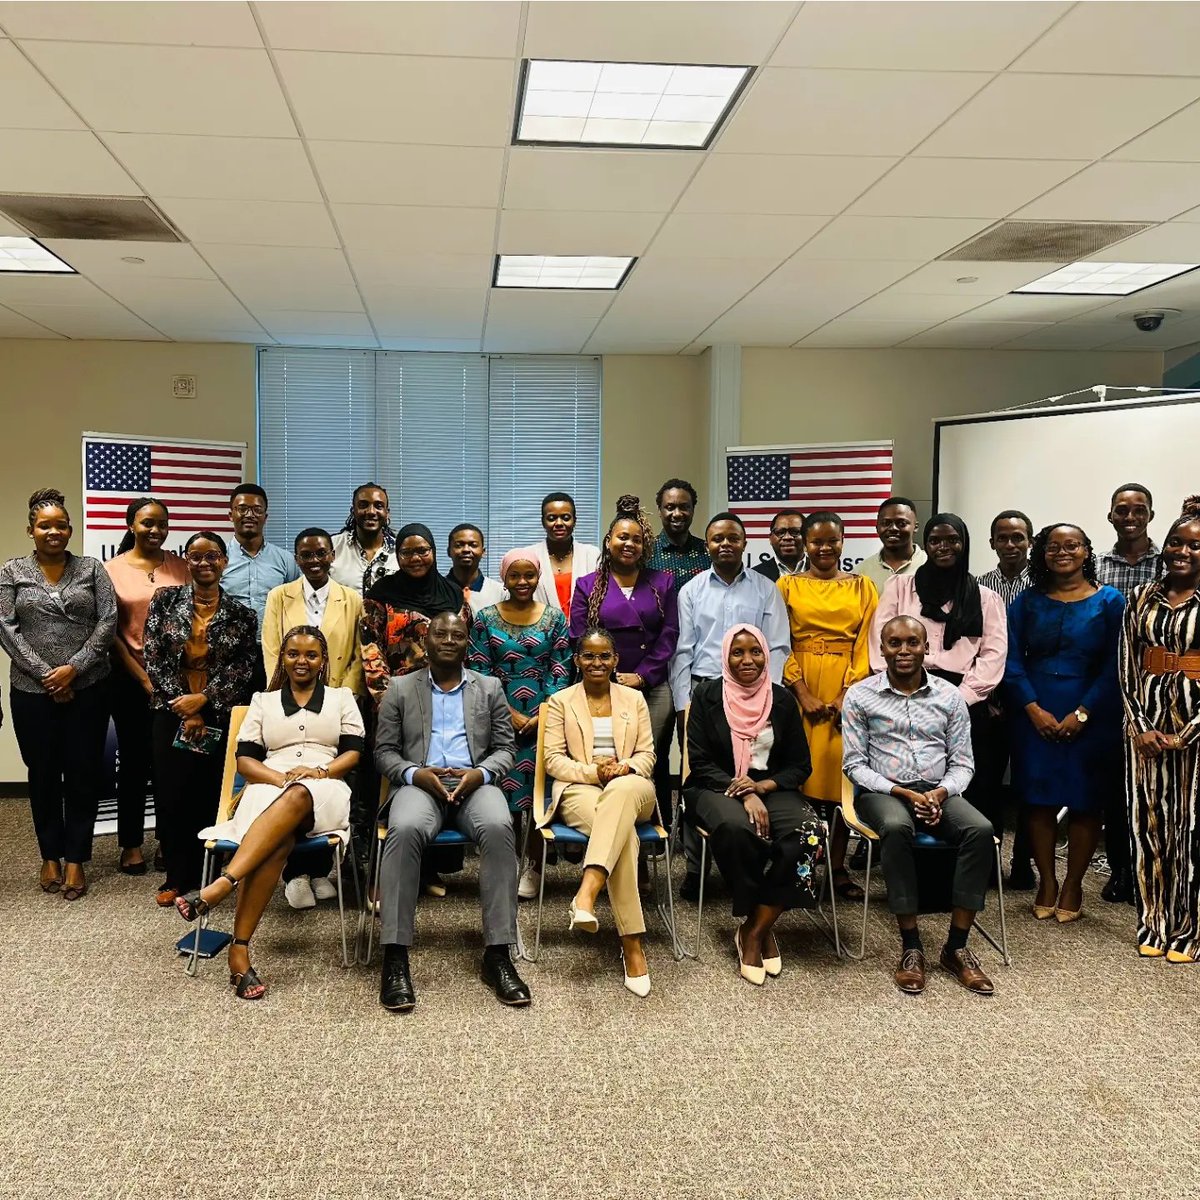 In commemorating Public Health Awareness Month, we are delighted to engage in a Panel discussion on Public Health matters, hosted by the U.S. Embassy of Tanzania 
#CommunitySolutions 
@usembassytz @cdcglobal @pepfar